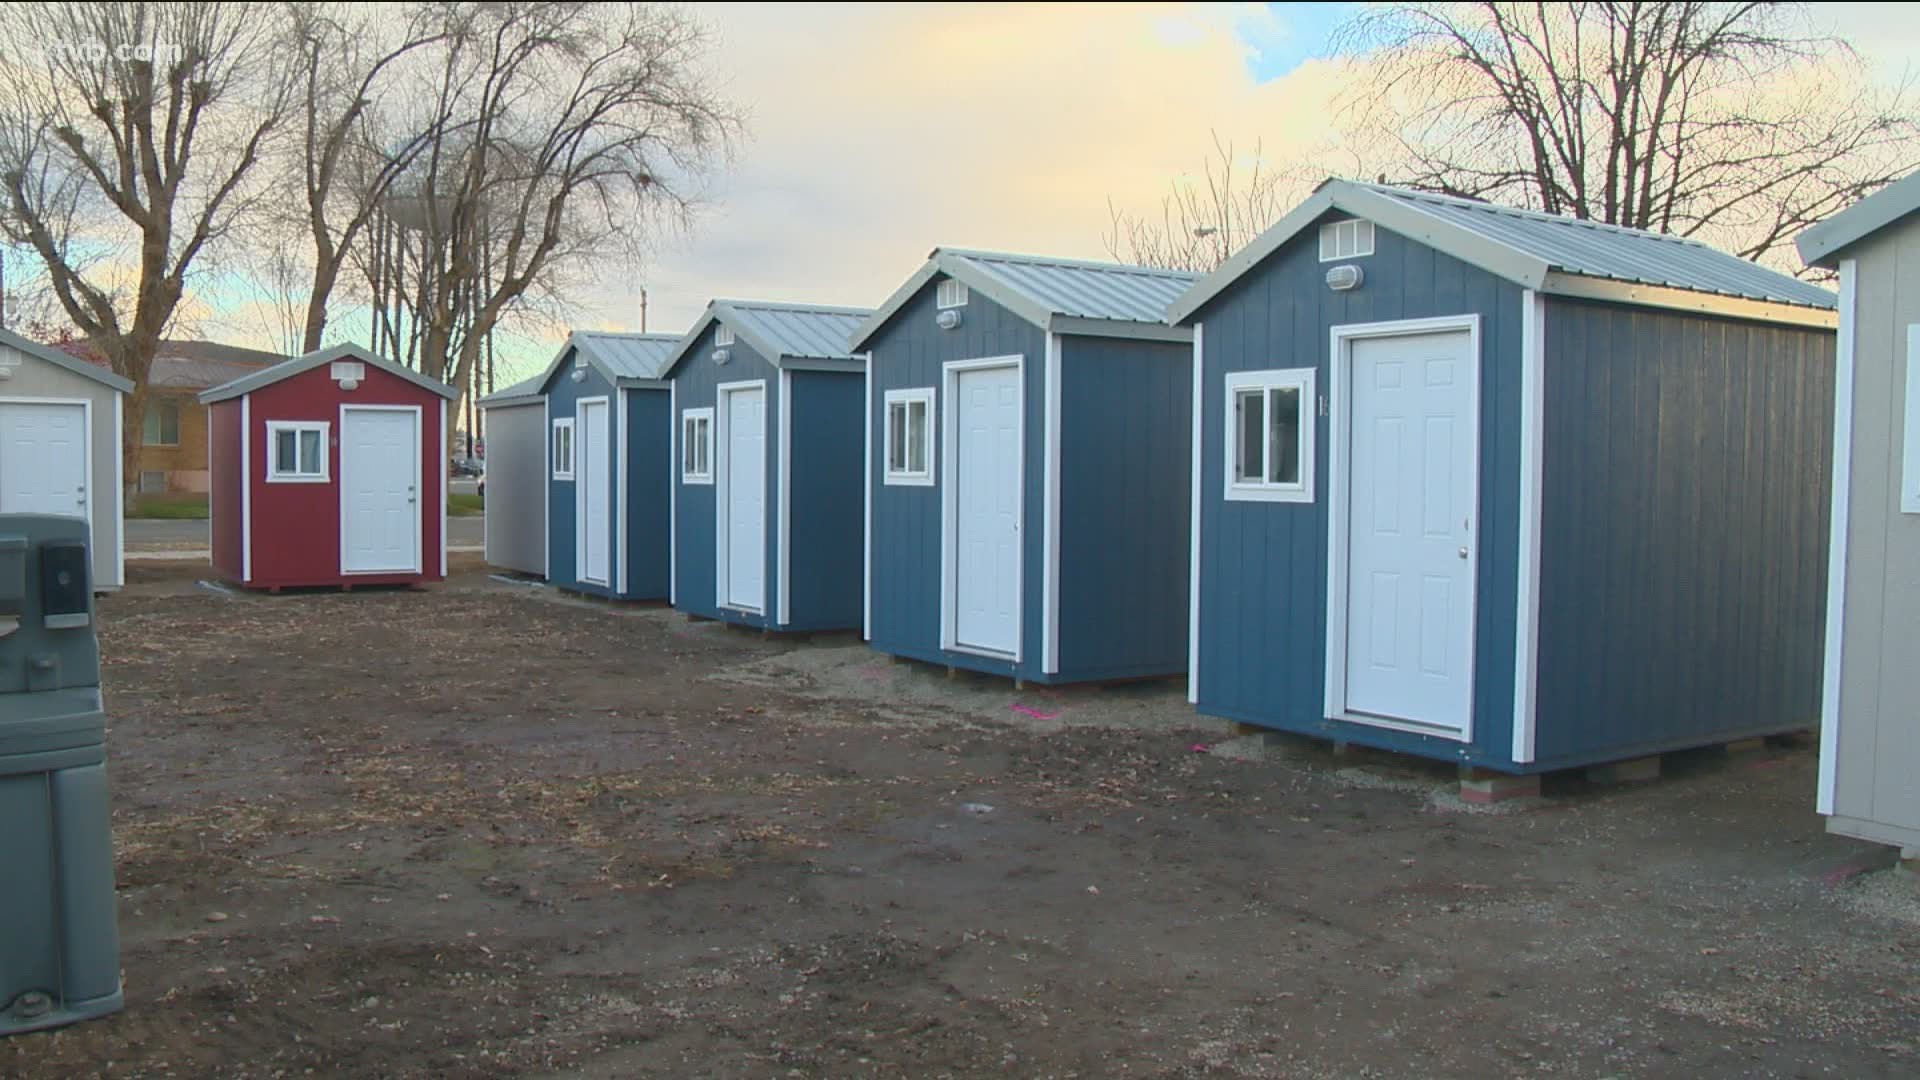 An Ontario non-profit is offering temporary housing to 16 individuals experiencing homelessness in an effort to combat housing insecurity in the city.